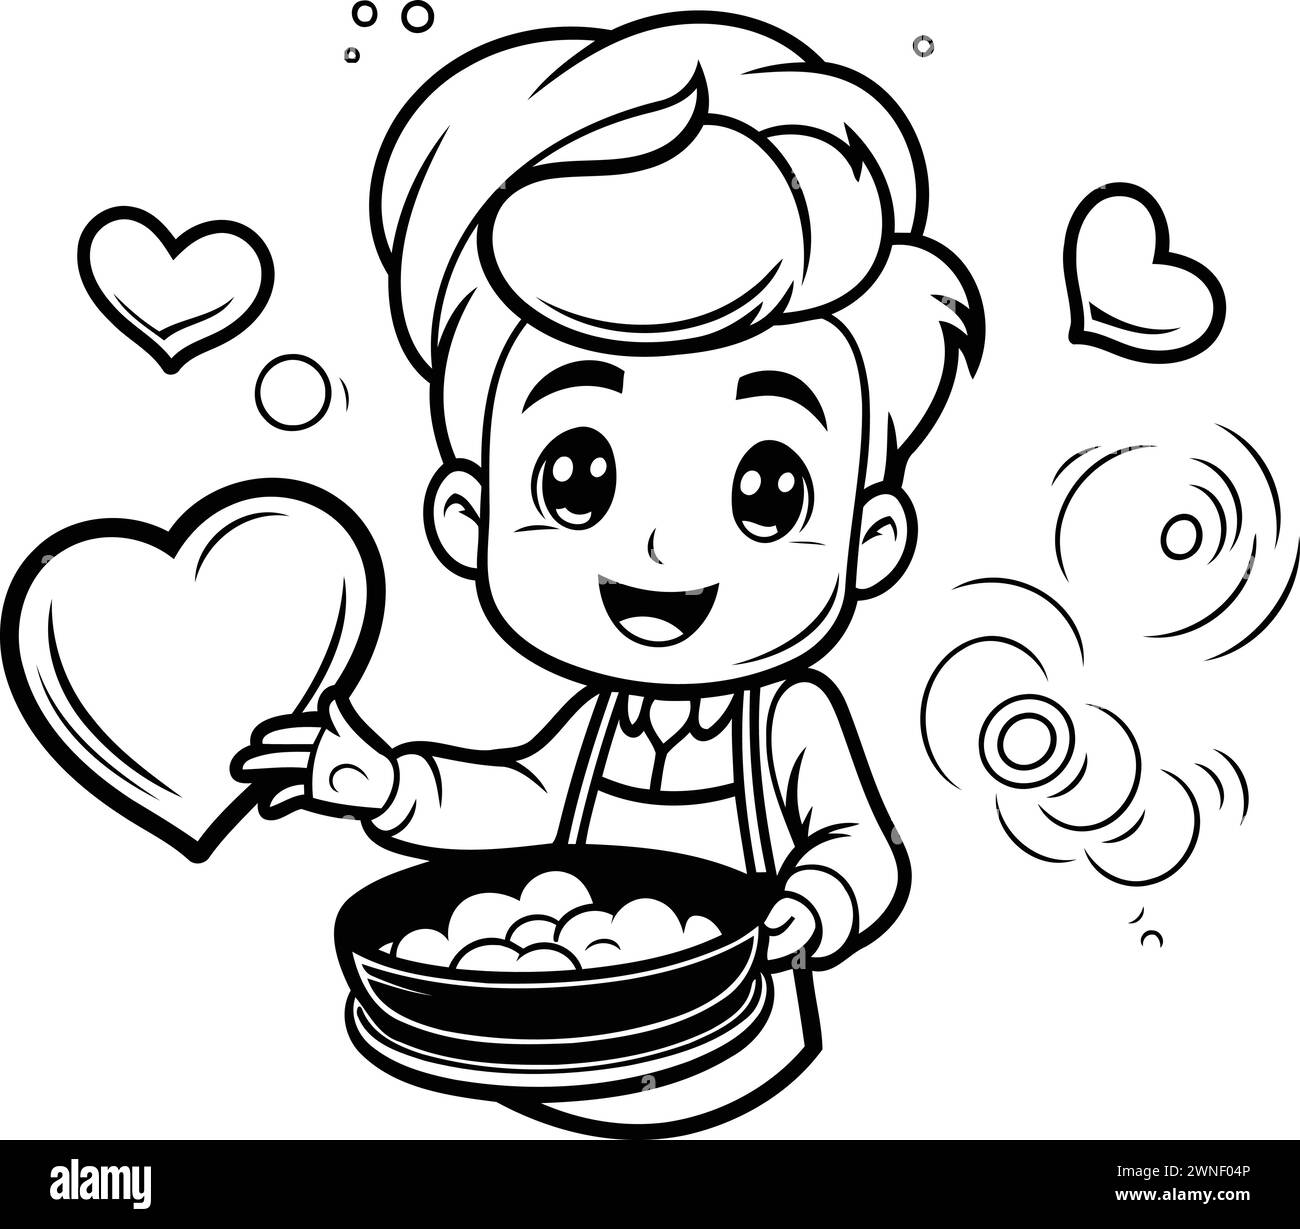 Black and White Cartoon Illustration of Cute Male Chef Holding Bowl of Food for Coloring Book Stock Vector